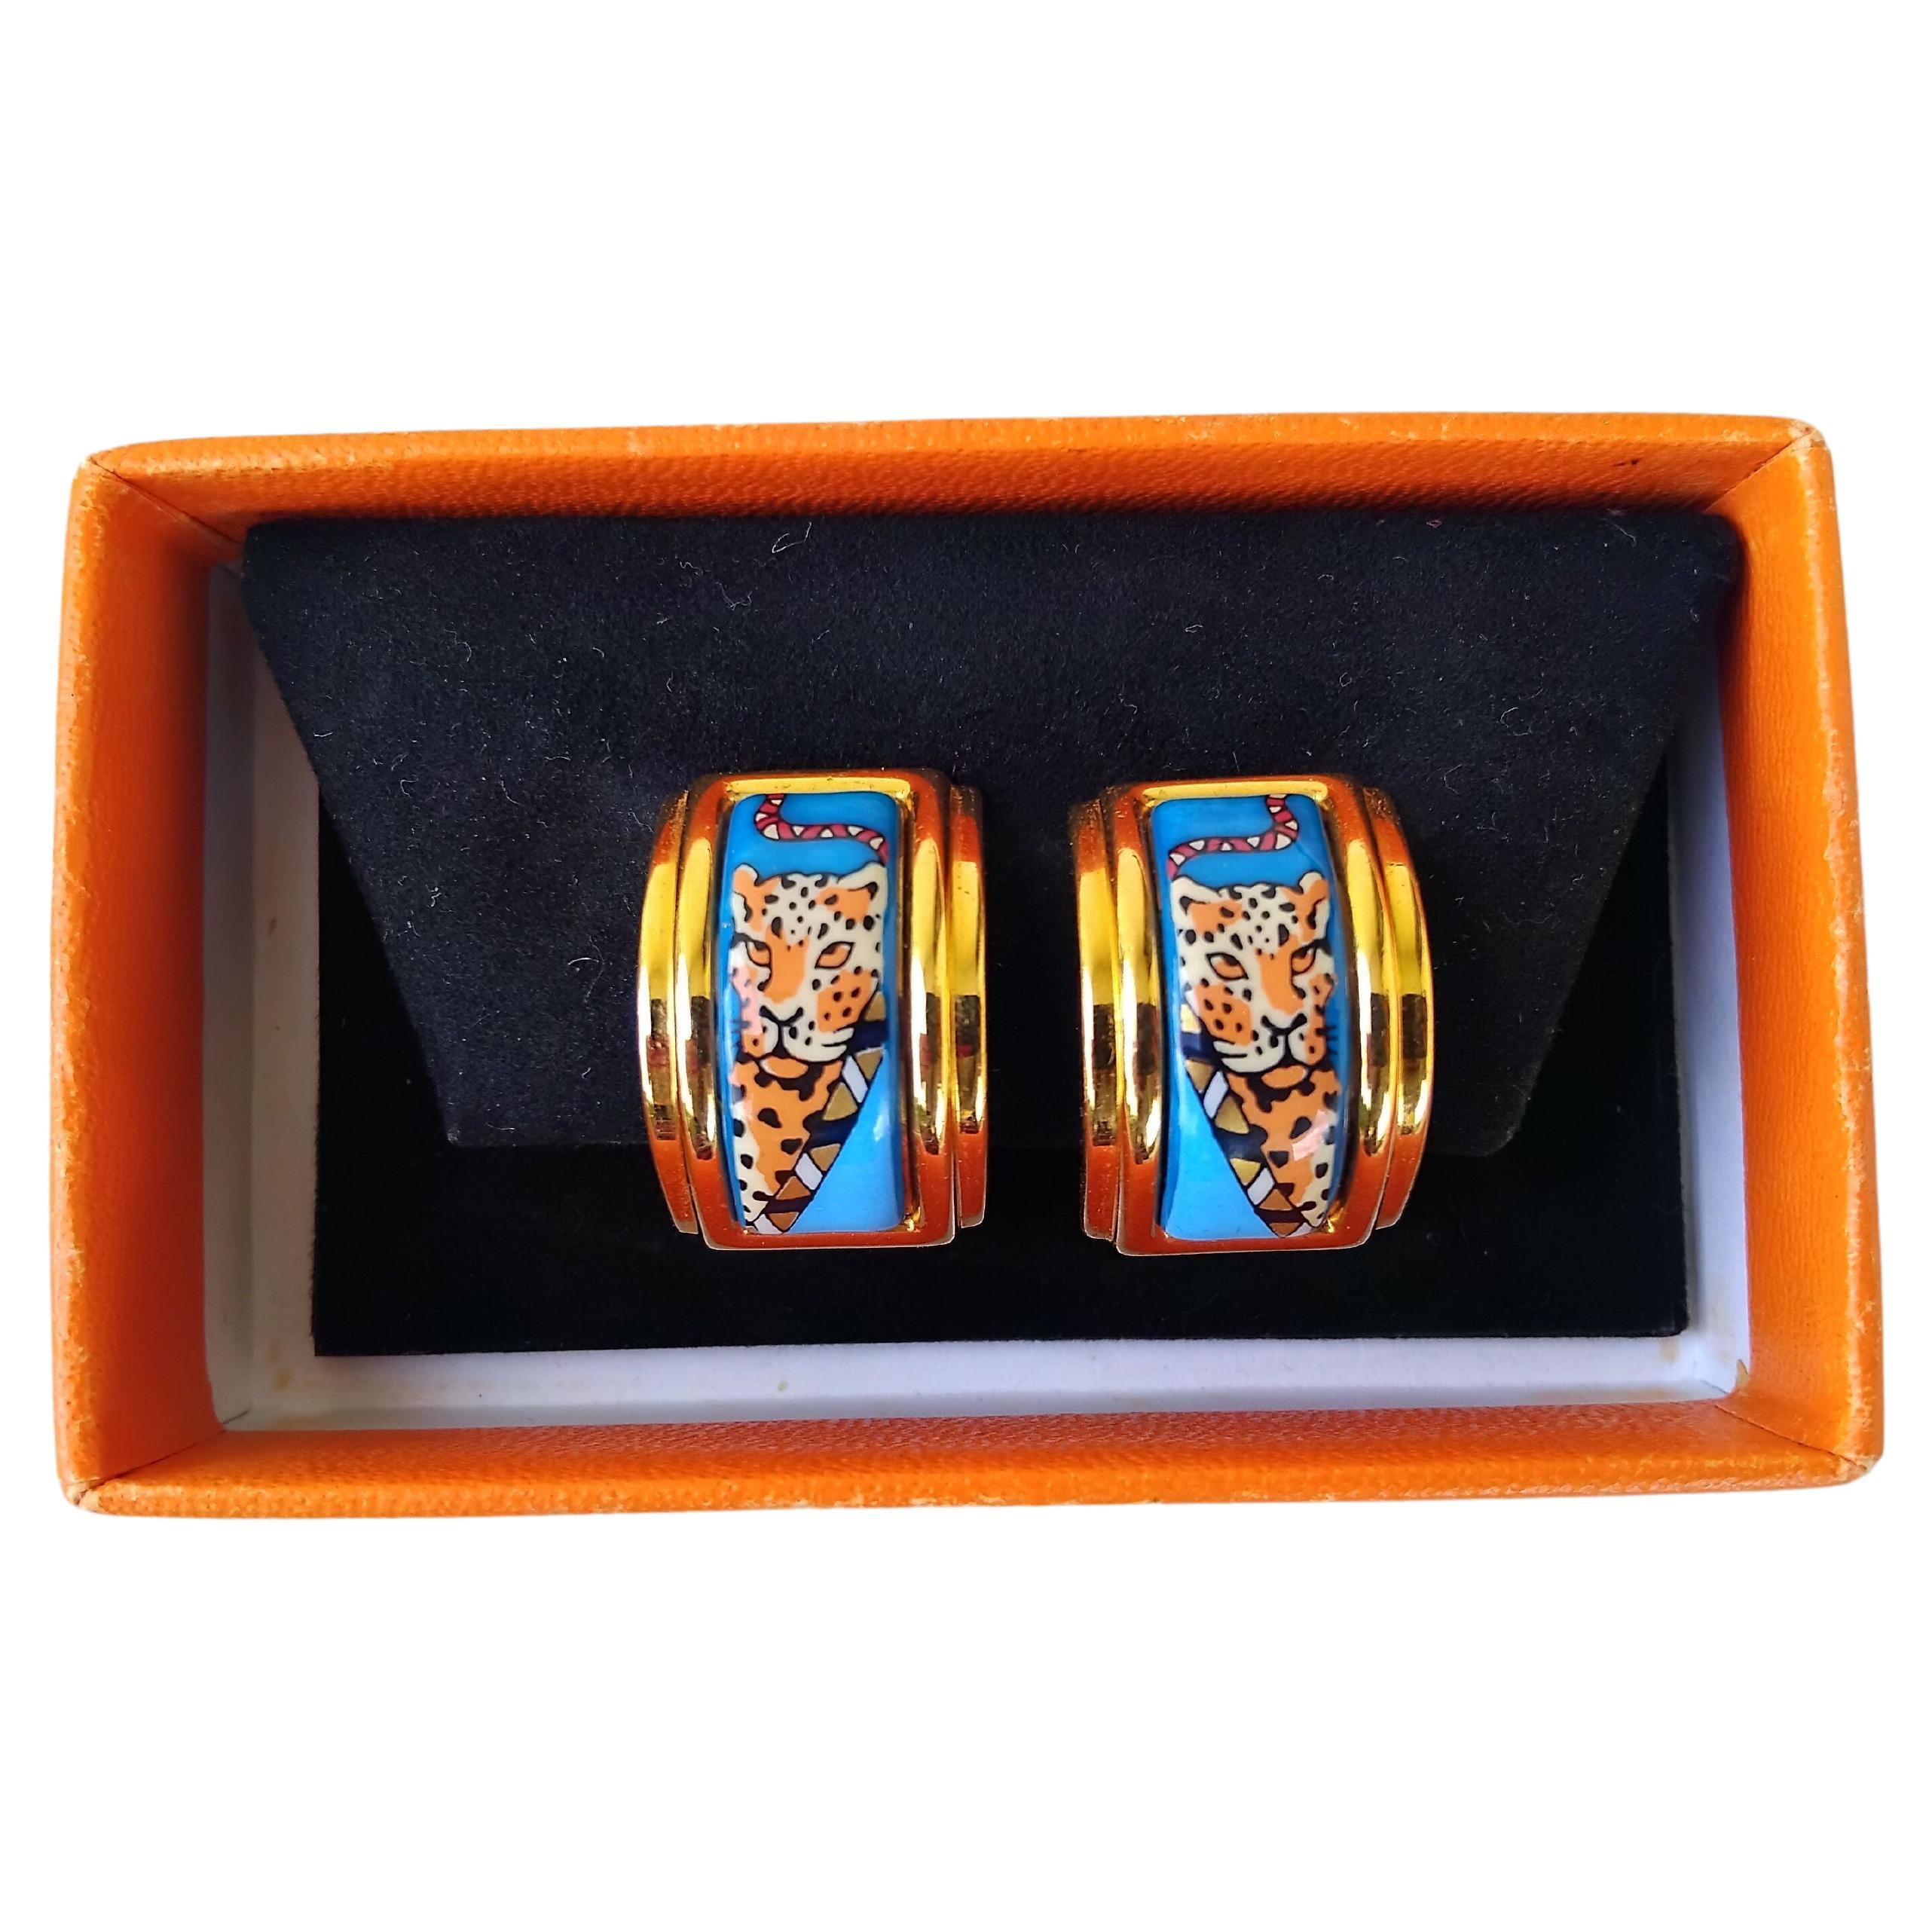 Beautiful and Rare Authentic Hermès Earrings

Print: Cheetah / Leopard 

Print from the silk collection, certainly inspired by the 